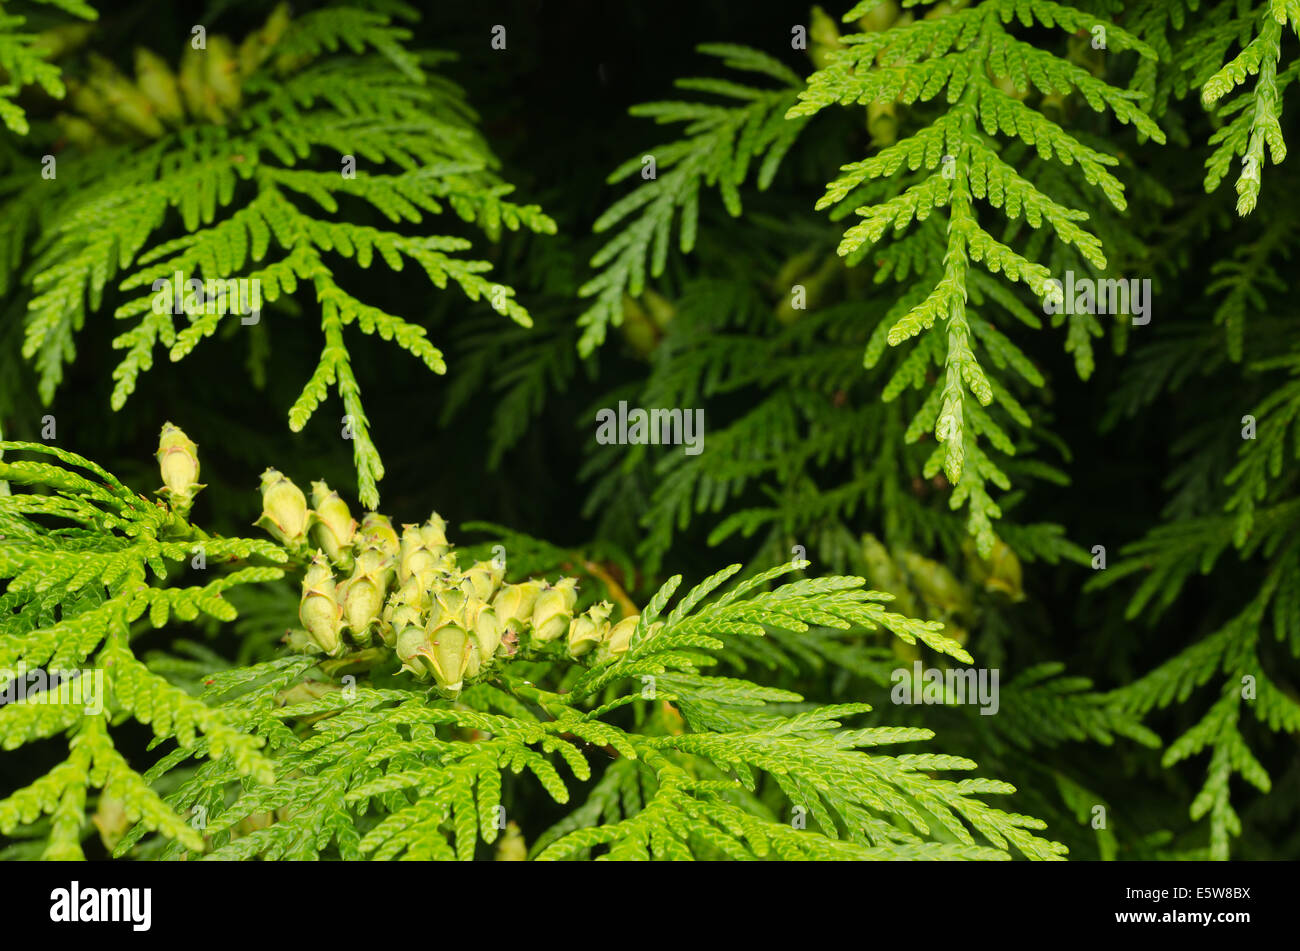 details of small delicate leaves of conifer cypress tree with mini seed cones amongst dark depths of foliage Stock Photo